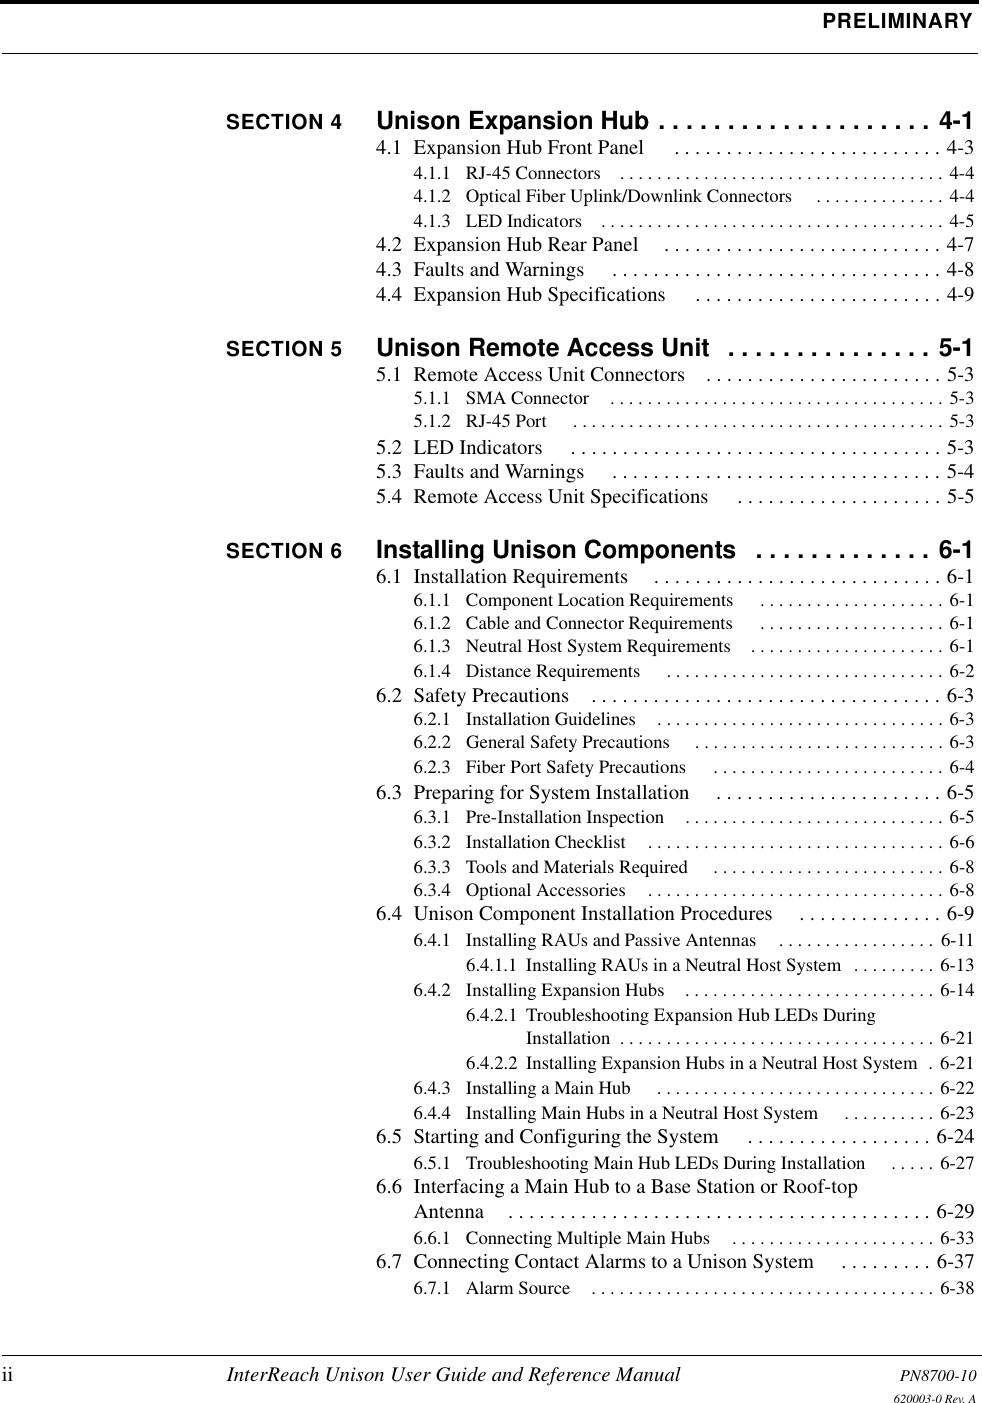 PRELIMINARYii InterReach Unison User Guide and Reference Manual PN8700-10620003-0 Rev. ASECTION 4 Unison Expansion Hub . . . . . . . . . . . . . . . . . . . . 4-14.1  Expansion Hub Front Panel  . . . . . . . . . . . . . . . . . . . . . . . . . . 4-34.1.1  RJ-45 Connectors . . . . . . . . . . . . . . . . . . . . . . . . . . . . . . . . . . . 4-44.1.2  Optical Fiber Uplink/Downlink Connectors  . . . . . . . . . . . . . . 4-44.1.3  LED Indicators . . . . . . . . . . . . . . . . . . . . . . . . . . . . . . . . . . . . . 4-54.2  Expansion Hub Rear Panel . . . . . . . . . . . . . . . . . . . . . . . . . . . 4-74.3  Faults and Warnings  . . . . . . . . . . . . . . . . . . . . . . . . . . . . . . . . 4-84.4  Expansion Hub Specifications  . . . . . . . . . . . . . . . . . . . . . . . . 4-9SECTION 5 Unison Remote Access Unit  . . . . . . . . . . . . . . . 5-15.1  Remote Access Unit Connectors . . . . . . . . . . . . . . . . . . . . . . . 5-35.1.1  SMA Connector . . . . . . . . . . . . . . . . . . . . . . . . . . . . . . . . . . . . 5-35.1.2  RJ-45 Port  . . . . . . . . . . . . . . . . . . . . . . . . . . . . . . . . . . . . . . . . 5-35.2  LED Indicators  . . . . . . . . . . . . . . . . . . . . . . . . . . . . . . . . . . . . 5-35.3  Faults and Warnings  . . . . . . . . . . . . . . . . . . . . . . . . . . . . . . . . 5-45.4  Remote Access Unit Specifications  . . . . . . . . . . . . . . . . . . . . 5-5SECTION 6 Installing Unison Components   . . . . . . . . . . . . . 6-16.1  Installation Requirements . . . . . . . . . . . . . . . . . . . . . . . . . . . . 6-16.1.1  Component Location Requirements  . . . . . . . . . . . . . . . . . . . . 6-16.1.2  Cable and Connector Requirements  . . . . . . . . . . . . . . . . . . . . 6-16.1.3  Neutral Host System Requirements . . . . . . . . . . . . . . . . . . . . . 6-16.1.4  Distance Requirements  . . . . . . . . . . . . . . . . . . . . . . . . . . . . . . 6-26.2  Safety Precautions . . . . . . . . . . . . . . . . . . . . . . . . . . . . . . . . . . 6-36.2.1  Installation Guidelines . . . . . . . . . . . . . . . . . . . . . . . . . . . . . . . 6-36.2.2  General Safety Precautions  . . . . . . . . . . . . . . . . . . . . . . . . . . . 6-36.2.3  Fiber Port Safety Precautions  . . . . . . . . . . . . . . . . . . . . . . . . . 6-46.3  Preparing for System Installation  . . . . . . . . . . . . . . . . . . . . . . 6-56.3.1  Pre-Installation Inspection . . . . . . . . . . . . . . . . . . . . . . . . . . . . 6-56.3.2  Installation Checklist . . . . . . . . . . . . . . . . . . . . . . . . . . . . . . . . 6-66.3.3  Tools and Materials Required  . . . . . . . . . . . . . . . . . . . . . . . . . 6-86.3.4  Optional Accessories . . . . . . . . . . . . . . . . . . . . . . . . . . . . . . . . 6-86.4  Unison Component Installation Procedures  . . . . . . . . . . . . . . 6-96.4.1  Installing RAUs and Passive Antennas . . . . . . . . . . . . . . . . .  6-116.4.1.1  Installing RAUs in a Neutral Host System  . . . . . . . . . 6-136.4.2  Installing Expansion Hubs . . . . . . . . . . . . . . . . . . . . . . . . . . . 6-146.4.2.1  Troubleshooting Expansion Hub LEDs During Installation  . . . . . . . . . . . . . . . . . . . . . . . . . . . . . . . . . . 6-216.4.2.2  Installing Expansion Hubs in a Neutral Host System  . 6-216.4.3  Installing a Main Hub  . . . . . . . . . . . . . . . . . . . . . . . . . . . . . . 6-226.4.4  Installing Main Hubs in a Neutral Host System  . . . . . . . . . . 6-236.5  Starting and Configuring the System  . . . . . . . . . . . . . . . . . . 6-246.5.1  Troubleshooting Main Hub LEDs During Installation  . . . . . 6-276.6  Interfacing a Main Hub to a Base Station or Roof-top Antenna . . . . . . . . . . . . . . . . . . . . . . . . . . . . . . . . . . . . . . . . . 6-296.6.1  Connecting Multiple Main Hubs . . . . . . . . . . . . . . . . . . . . . . 6-336.7  Connecting Contact Alarms to a Unison System  . . . . . . . . . 6-376.7.1  Alarm Source . . . . . . . . . . . . . . . . . . . . . . . . . . . . . . . . . . . . . 6-38